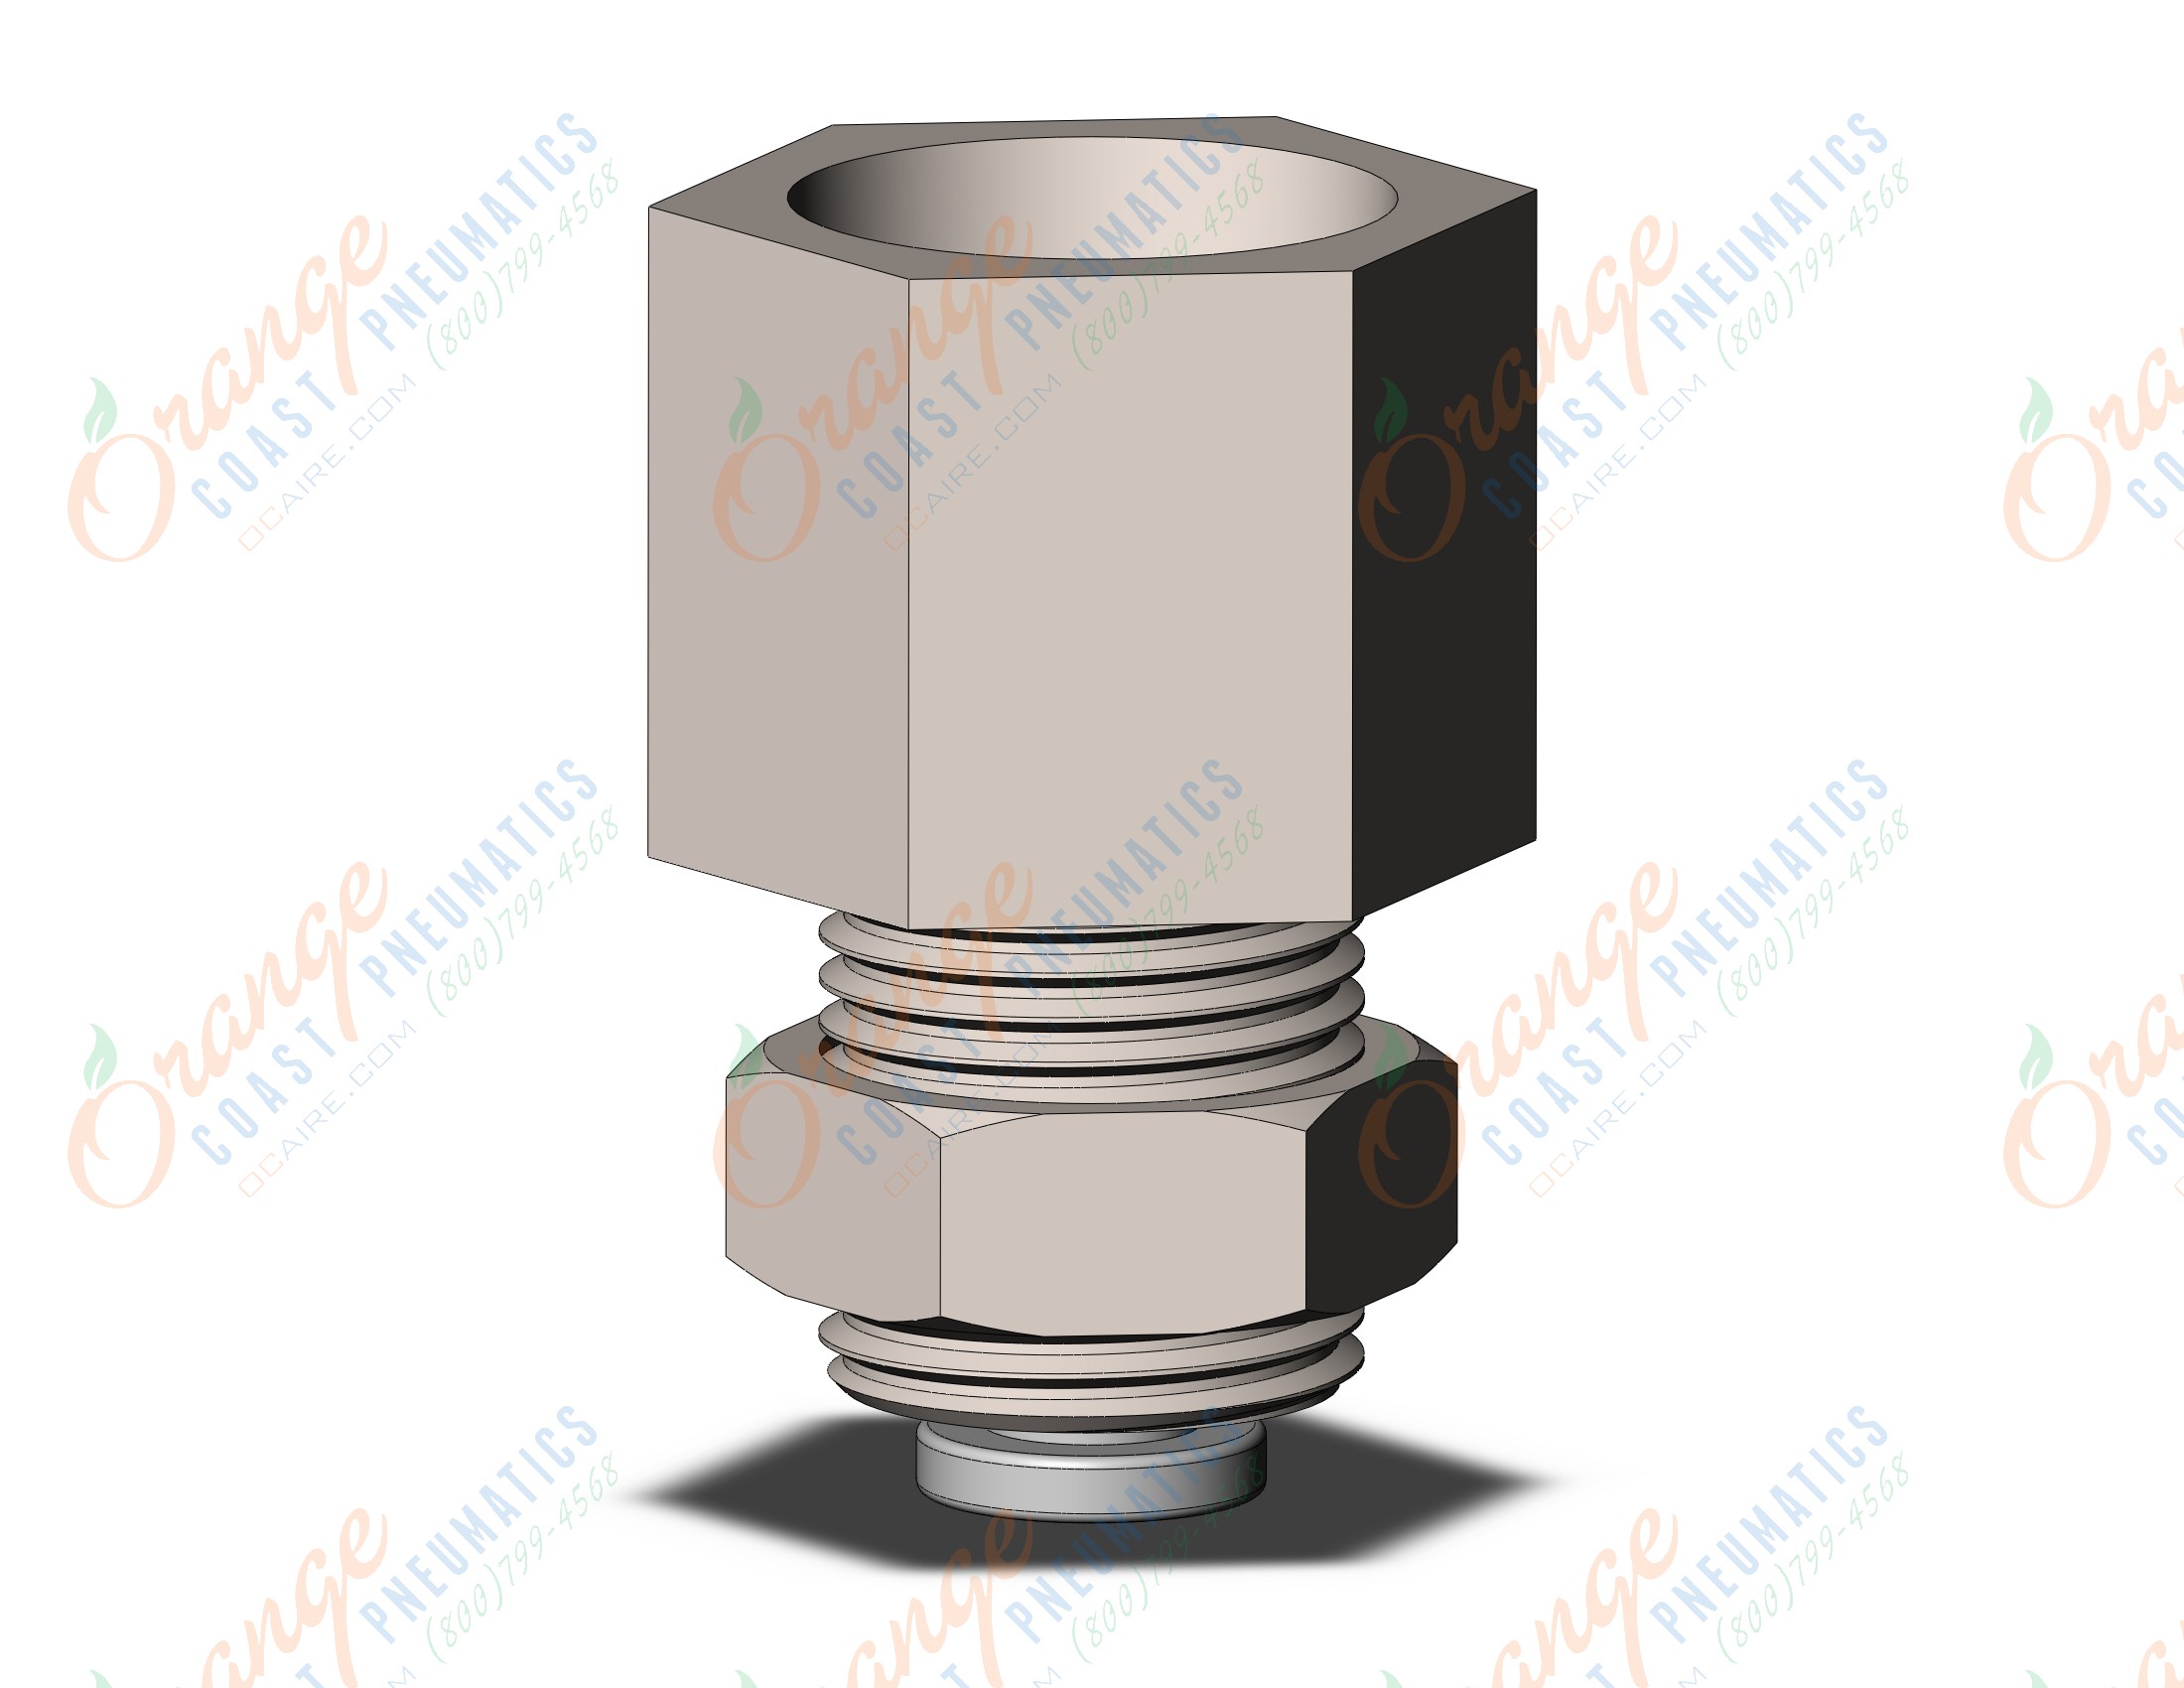 SMC KQ2E04-02N fitting, bulkhead connector, KQ2 FITTING (sold in packages of 10; price is per piece)